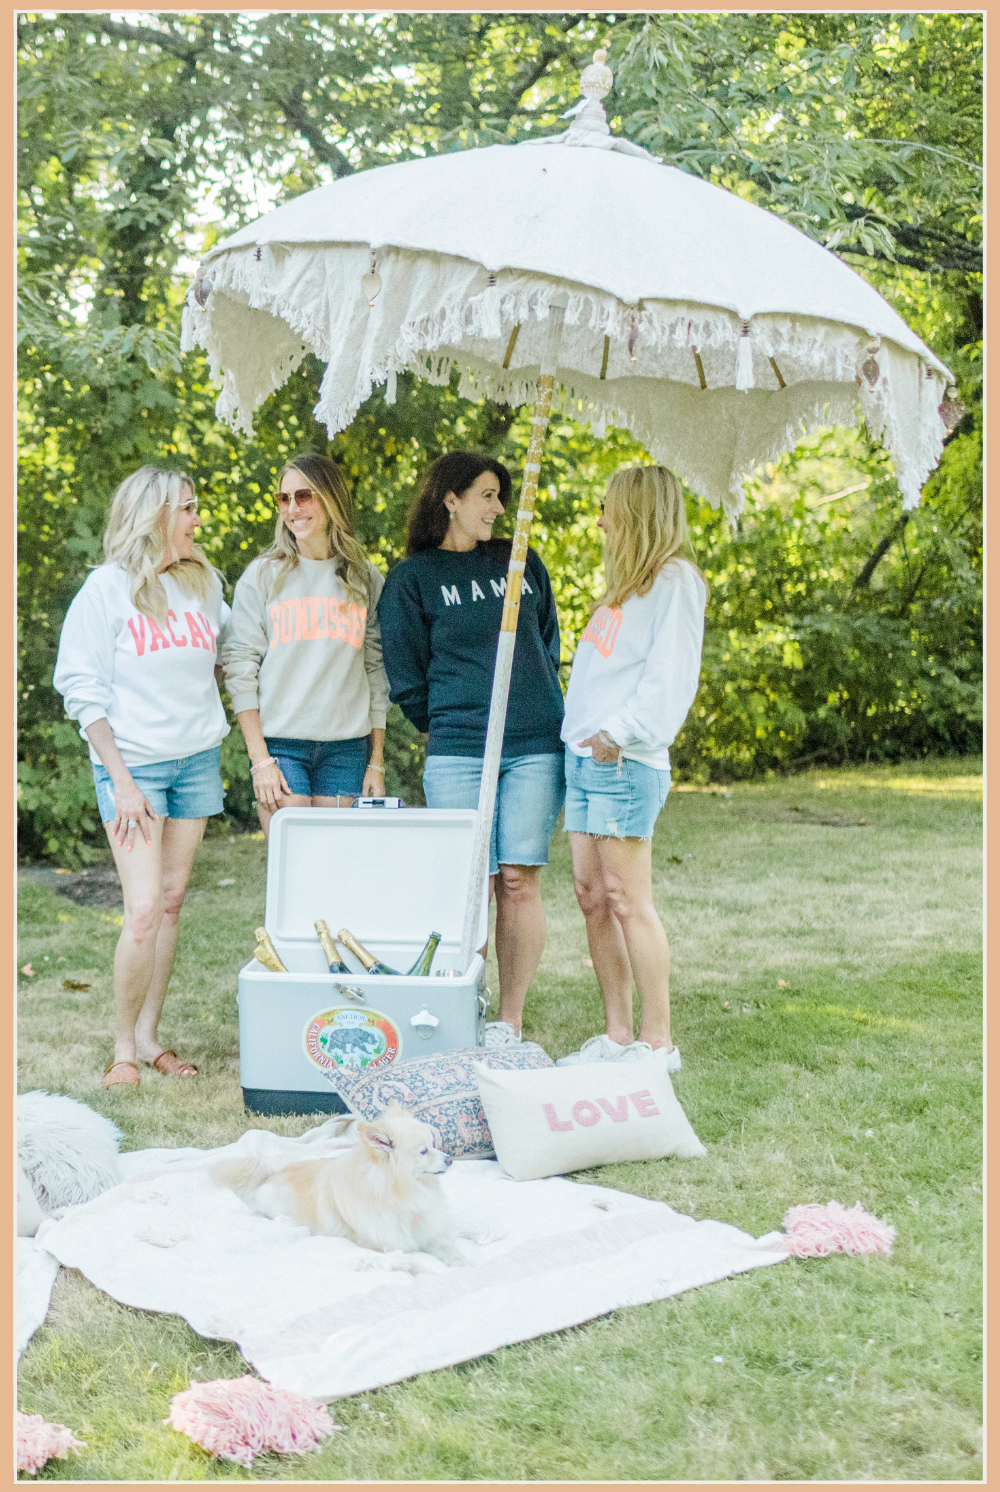 Home and Gifts | Women outside at a picnic with a beach umbrella and cooler of drinks | Vixen Collection | Seattle, WA